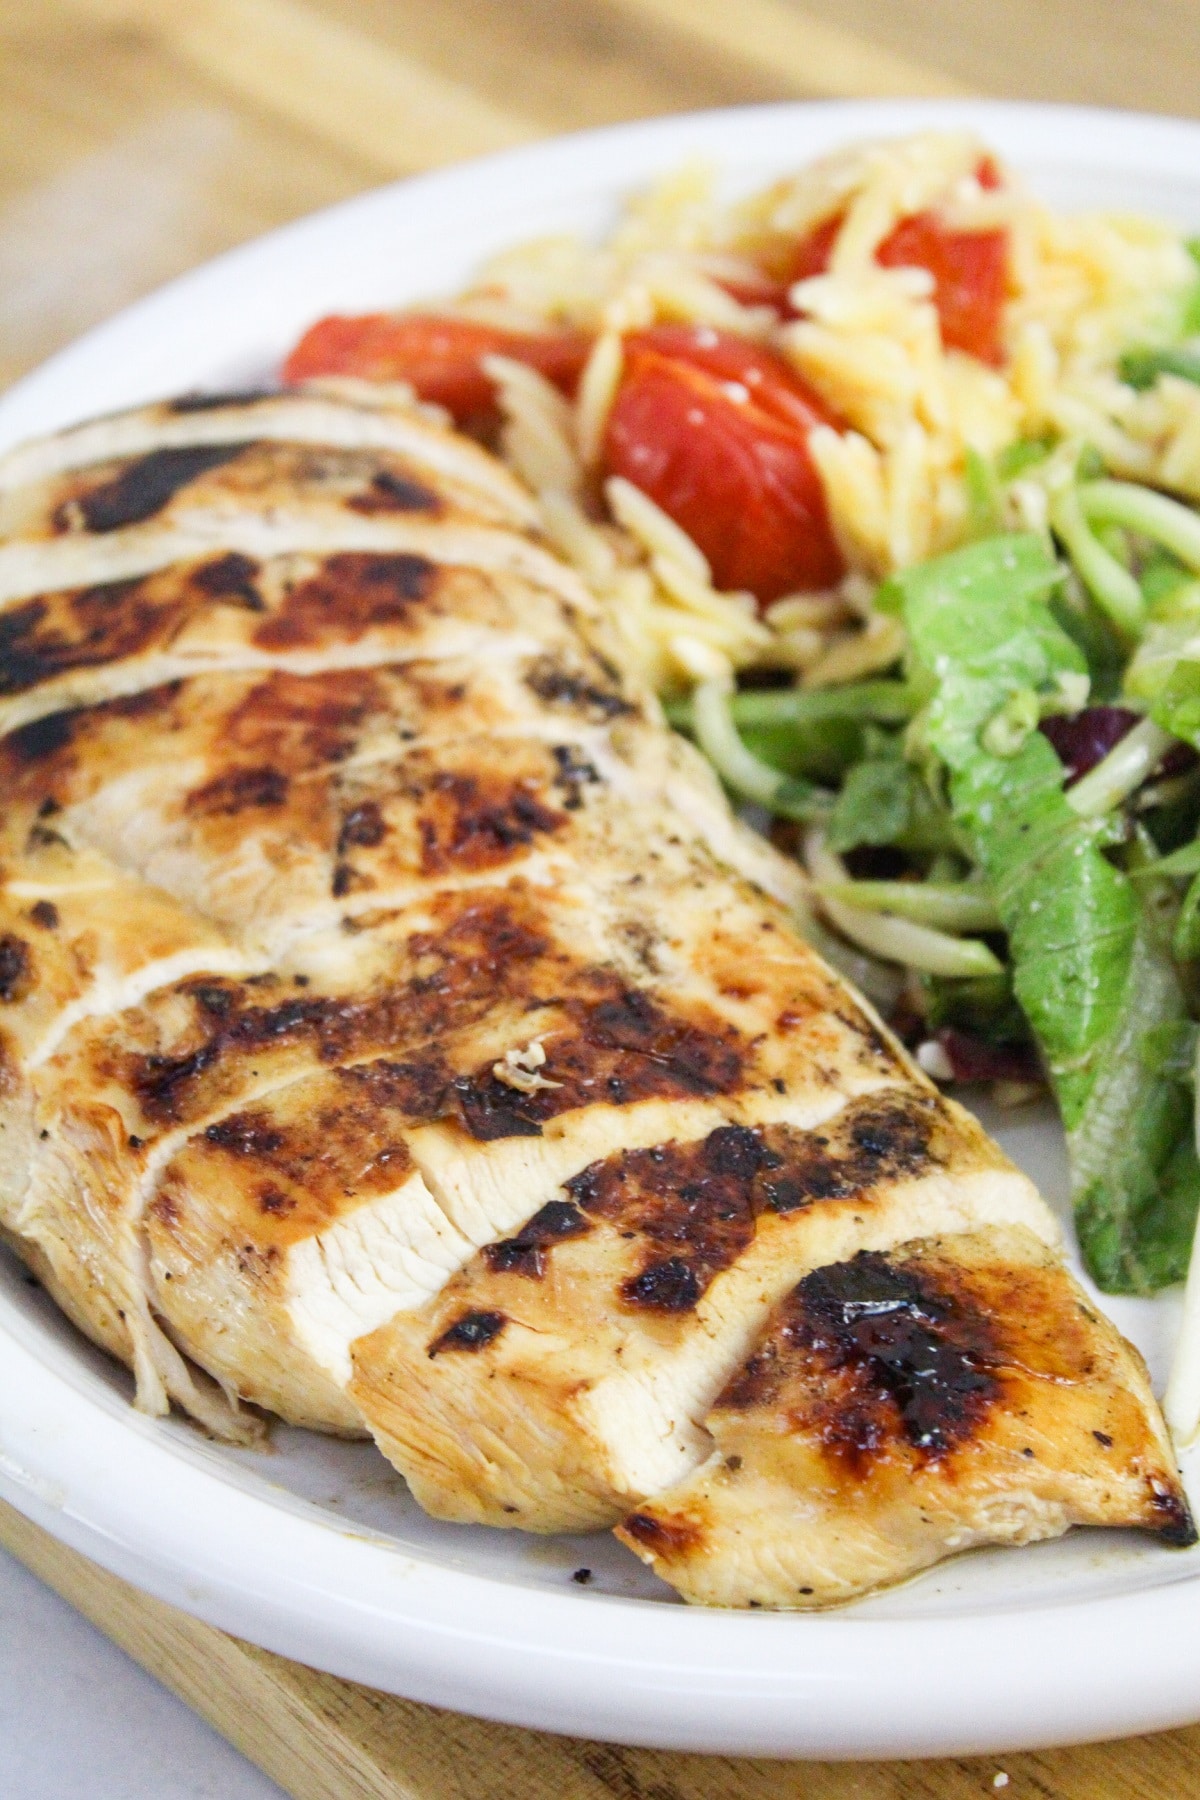 sliced grilled greek chicken on a plate with salad and rice.